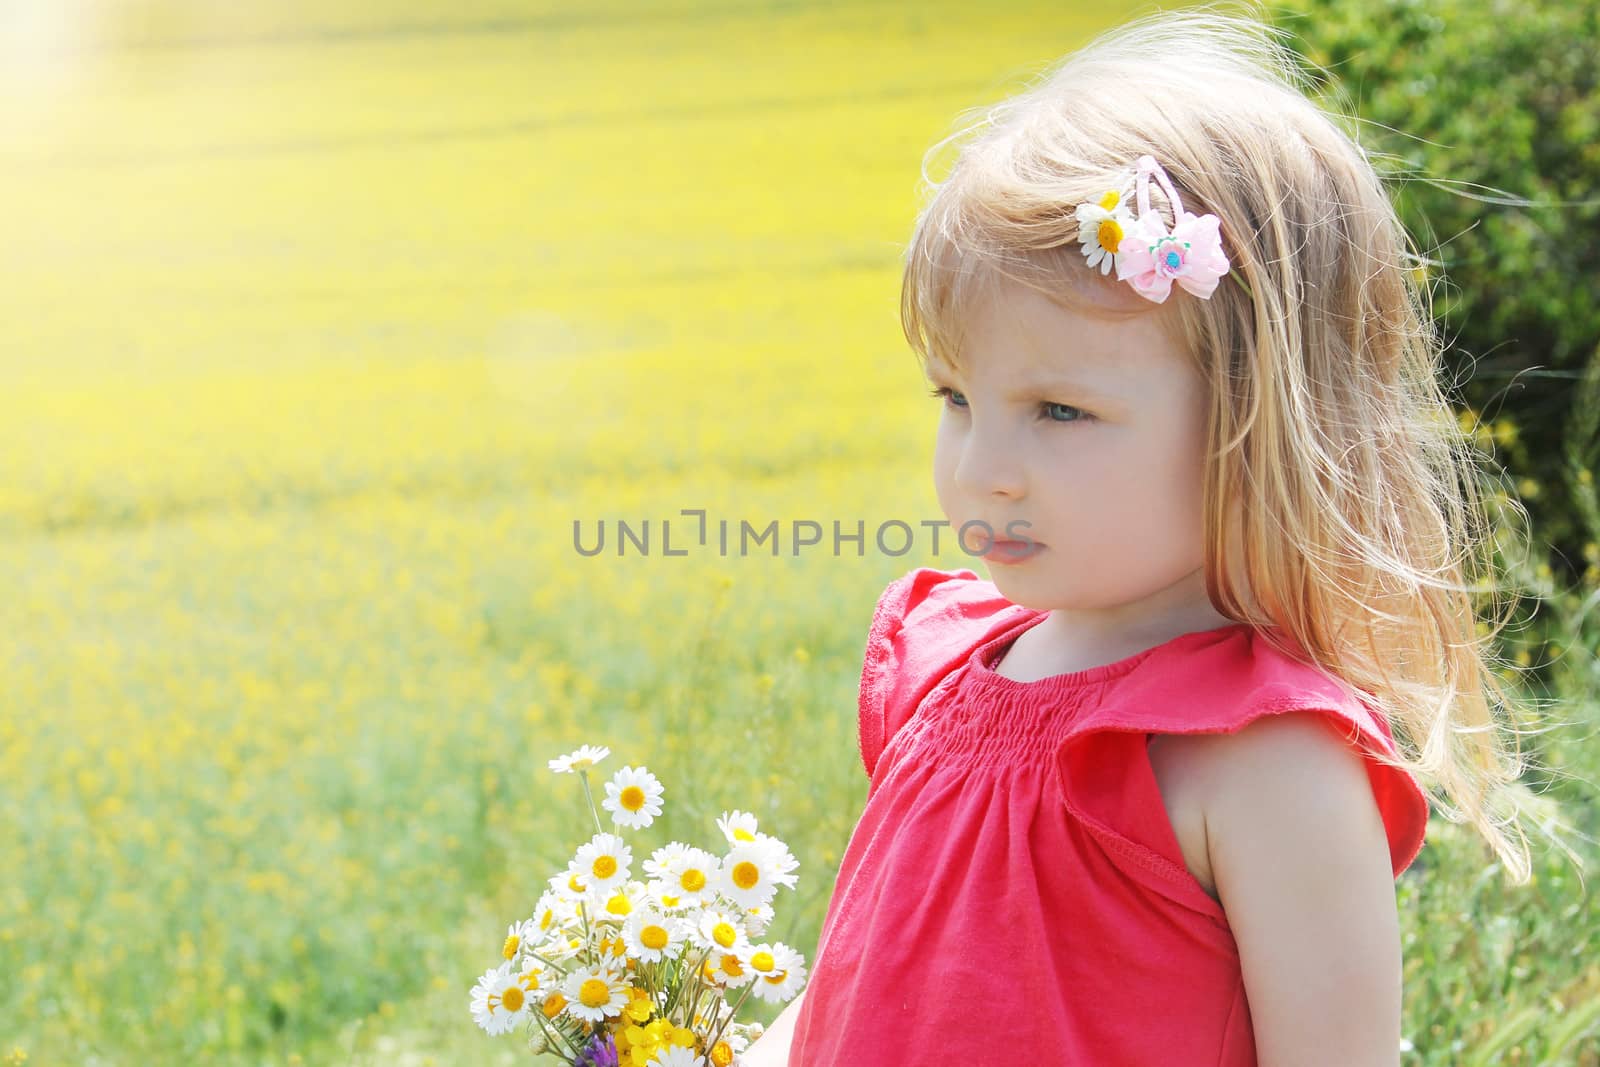 Baby girl among rapeseed field with camomile bouquet by Angel_a